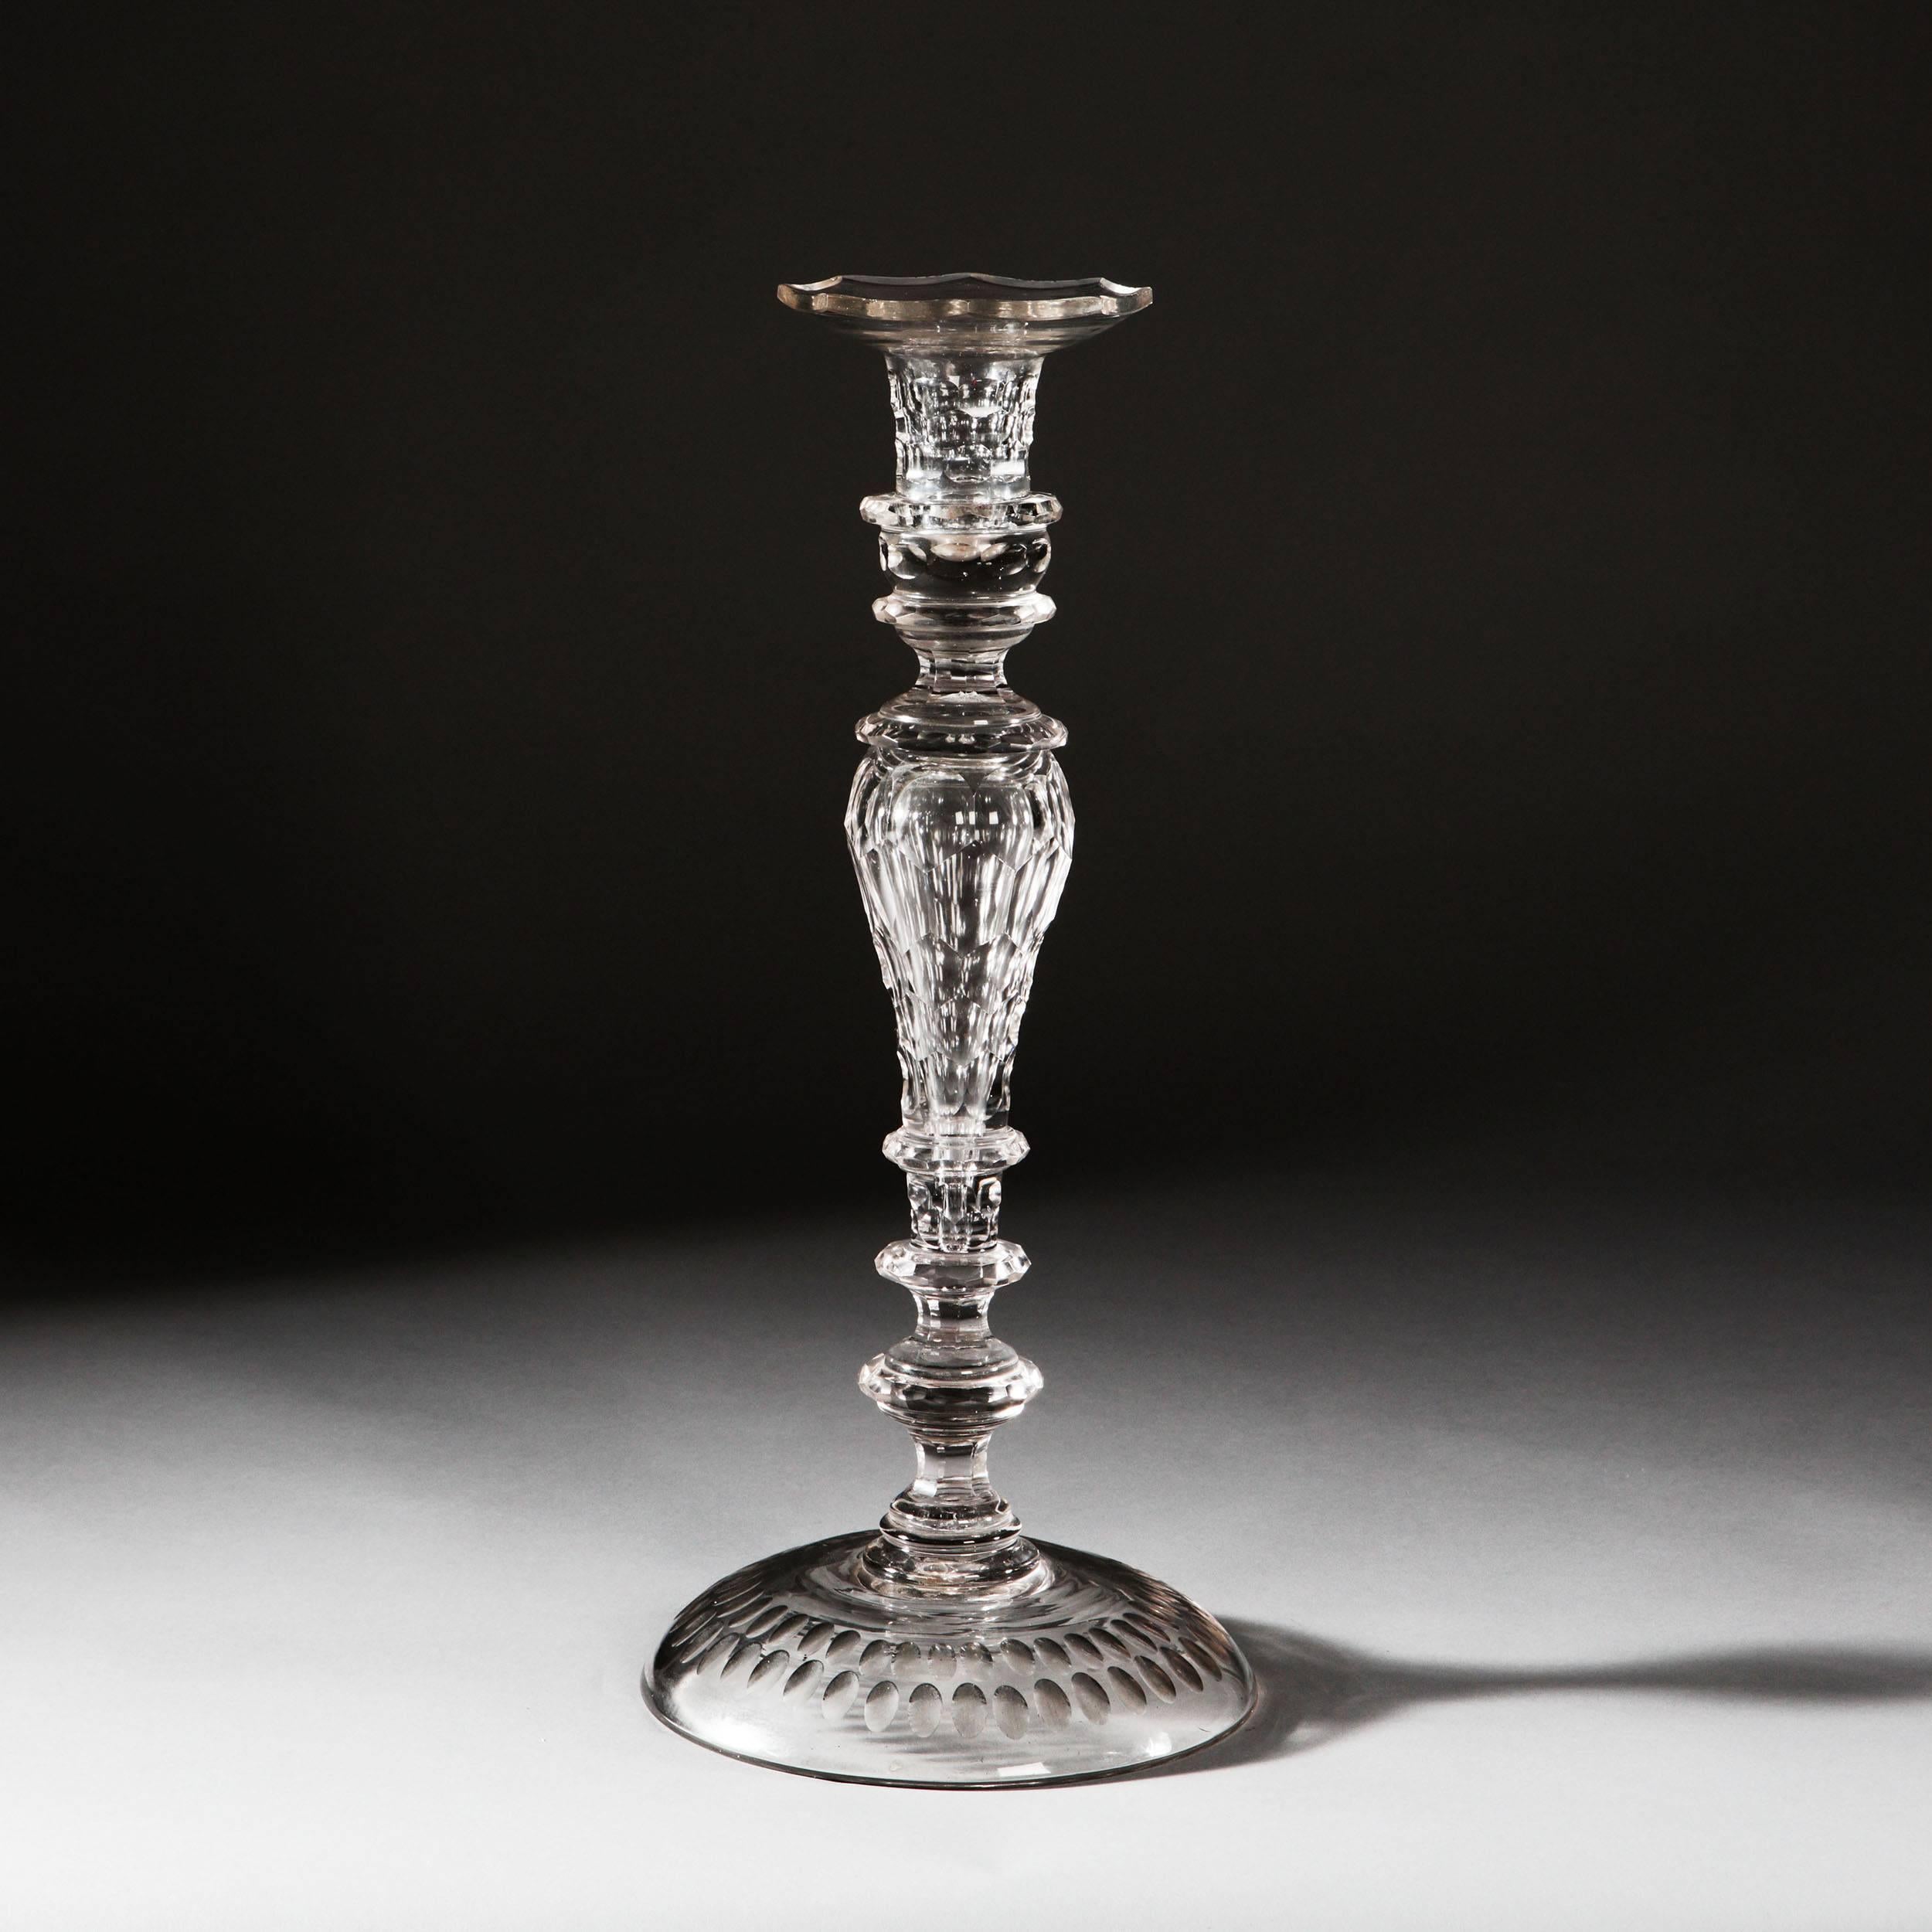 A fine late 19th century over scale glass candlestick, now mounted as a lamp.